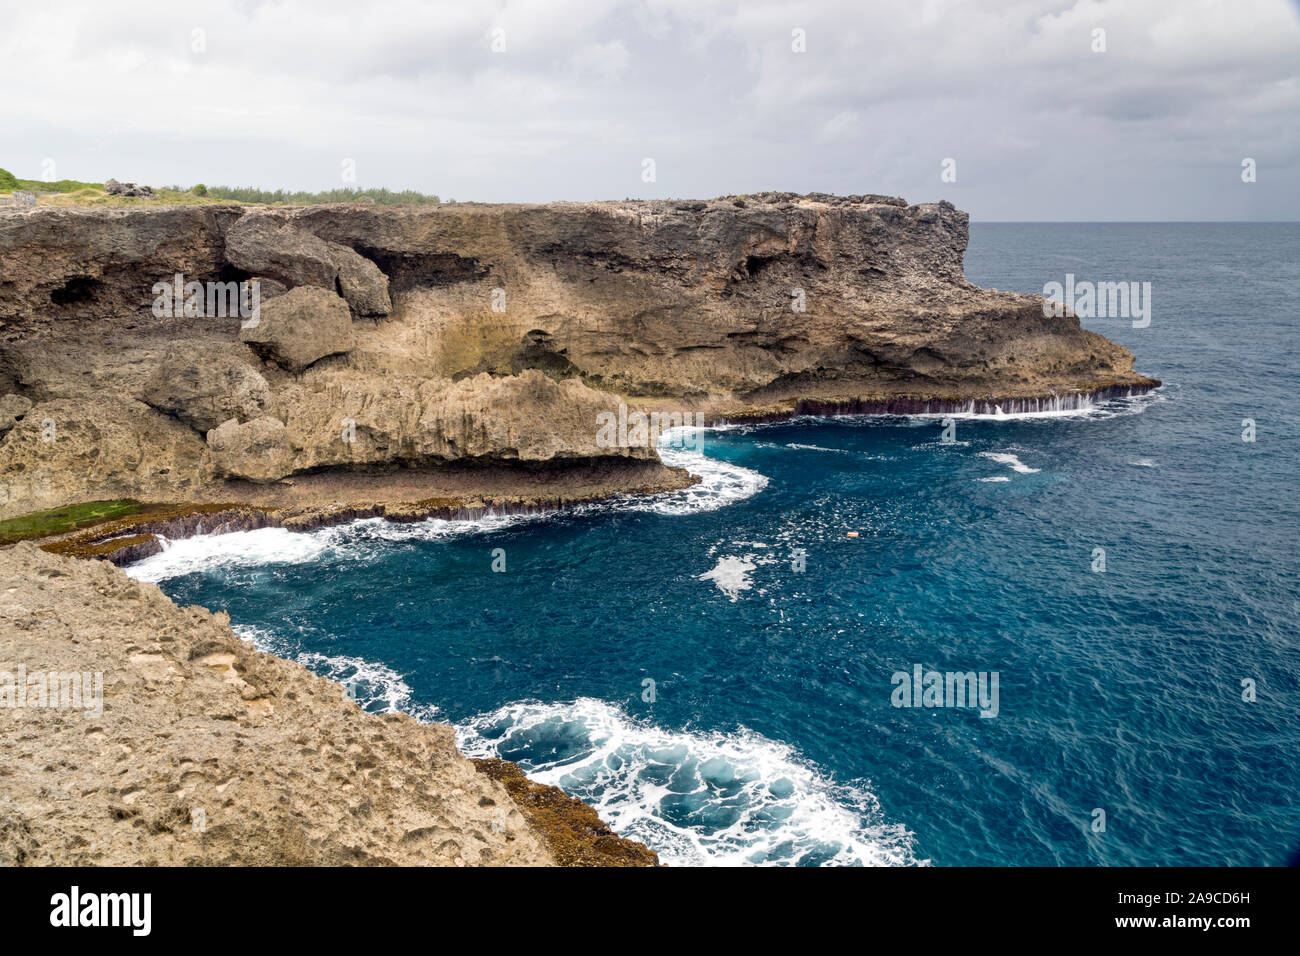 Rugged coastline at North Point on the Caribbean island of Barbados Stock Photo